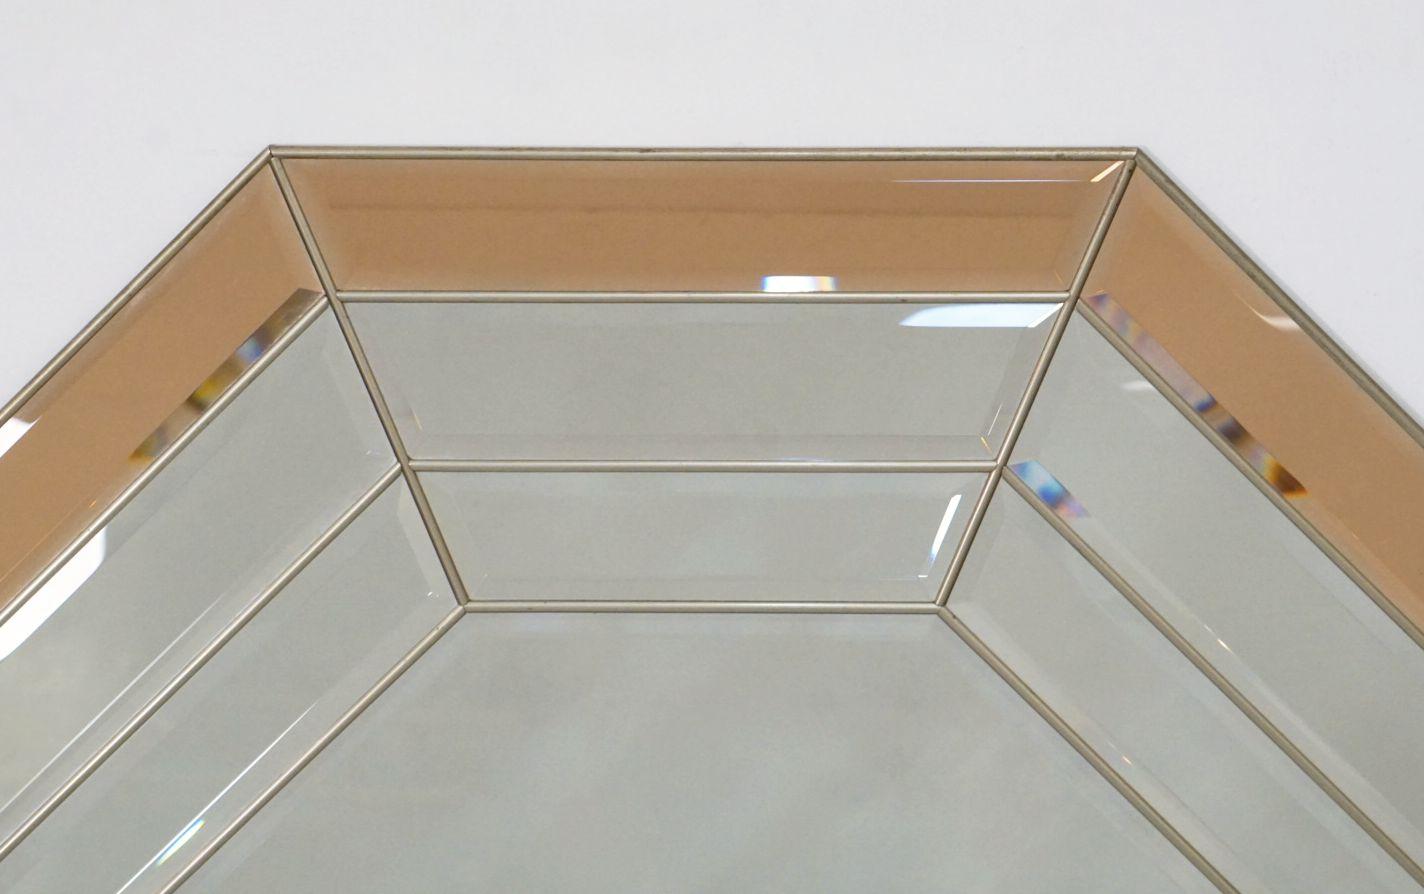 Octagonal Modernist Beveled Glass Wall Mirror from Italy (H 45 1/4 x W 35) In Good Condition For Sale In Austin, TX